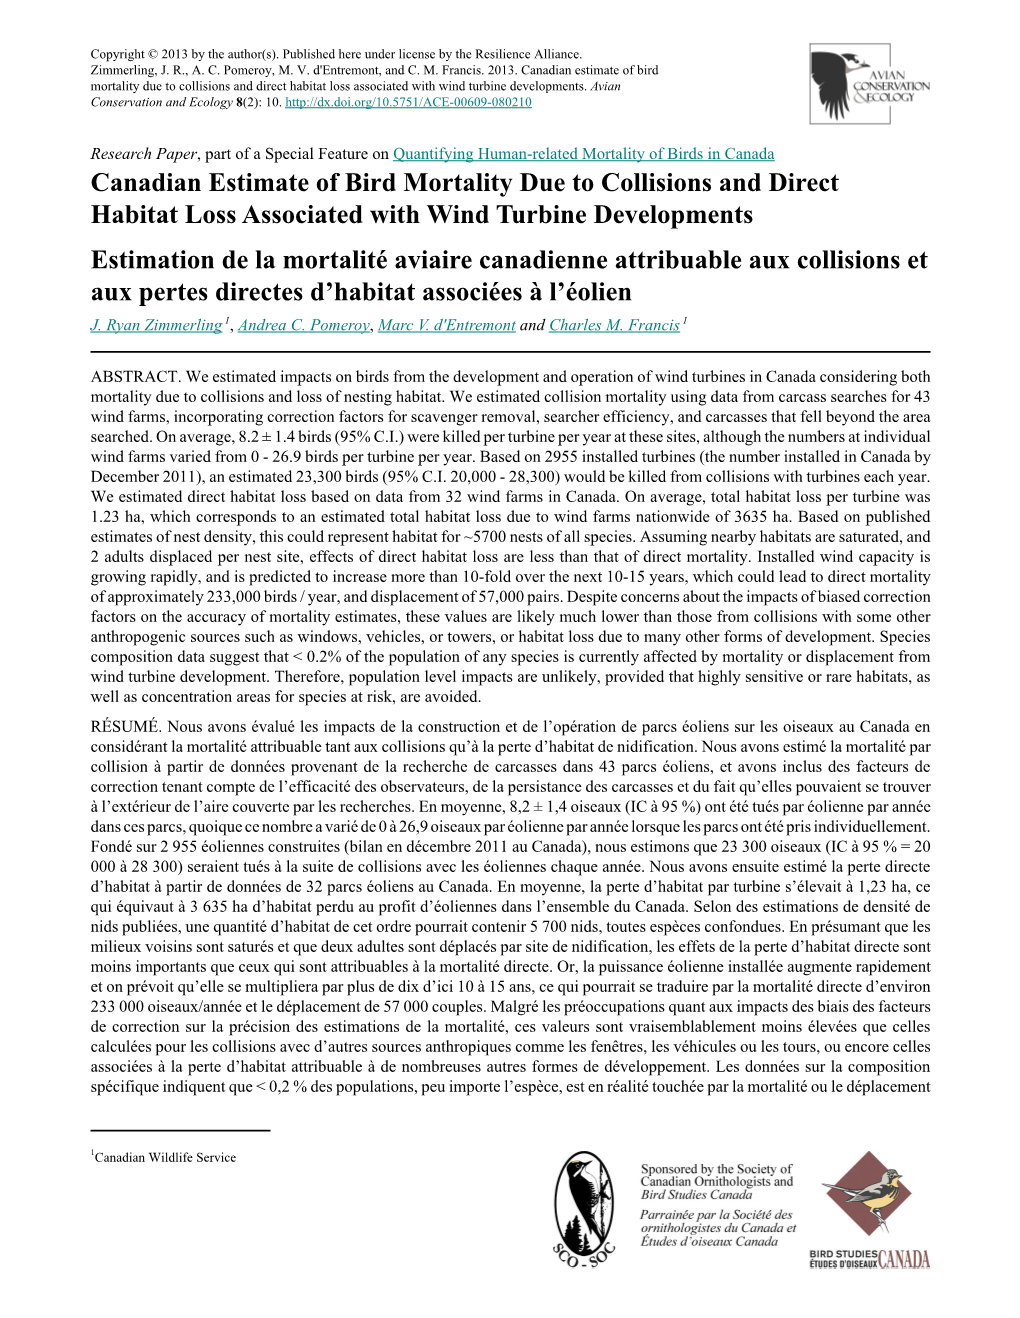 Canadian Estimate of Bird Mortality Due to Collisions and Direct Habitat Loss Associated with Wind Turbine Developments